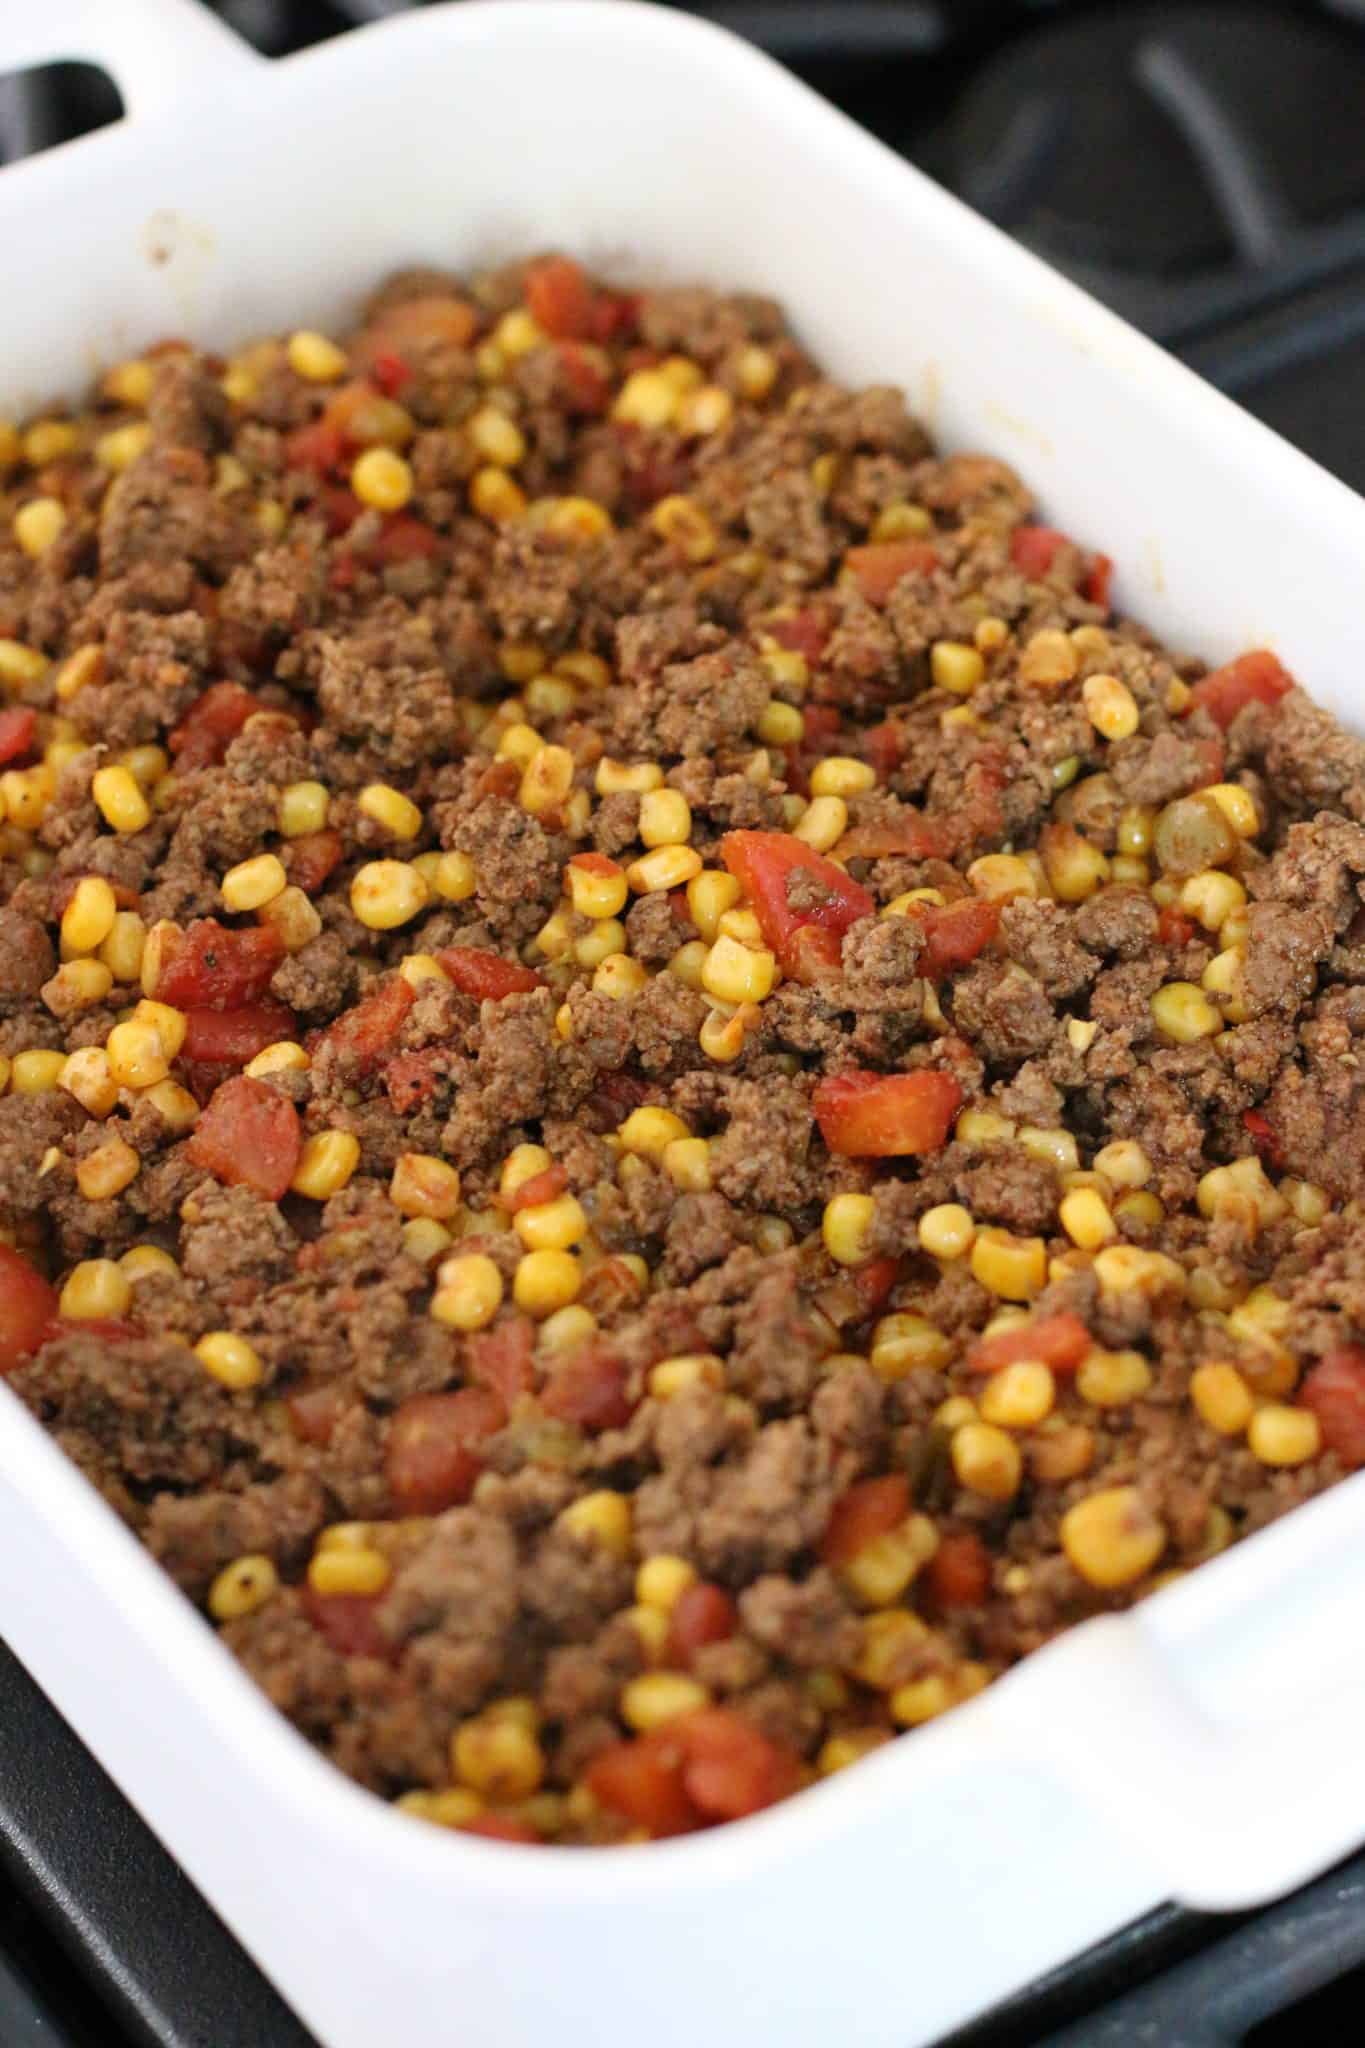 cooked ground beef mixture spread out on top of cornbread in a white baking dish.